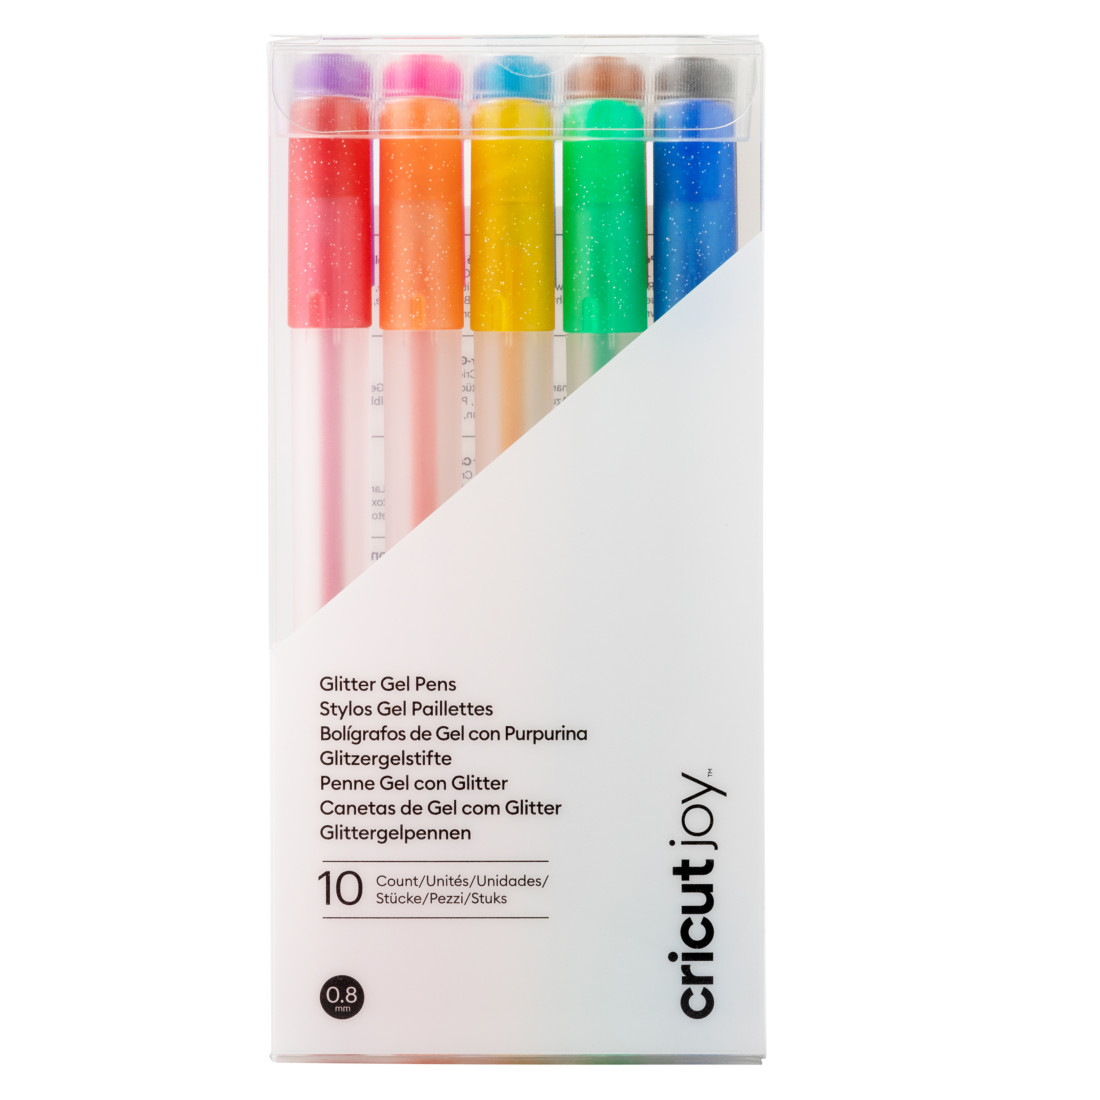  Cricut Glitter Gel Pens (Set Of 5), Add Sparkly Glow To  Cards, Paper, Decor, And More, For Use